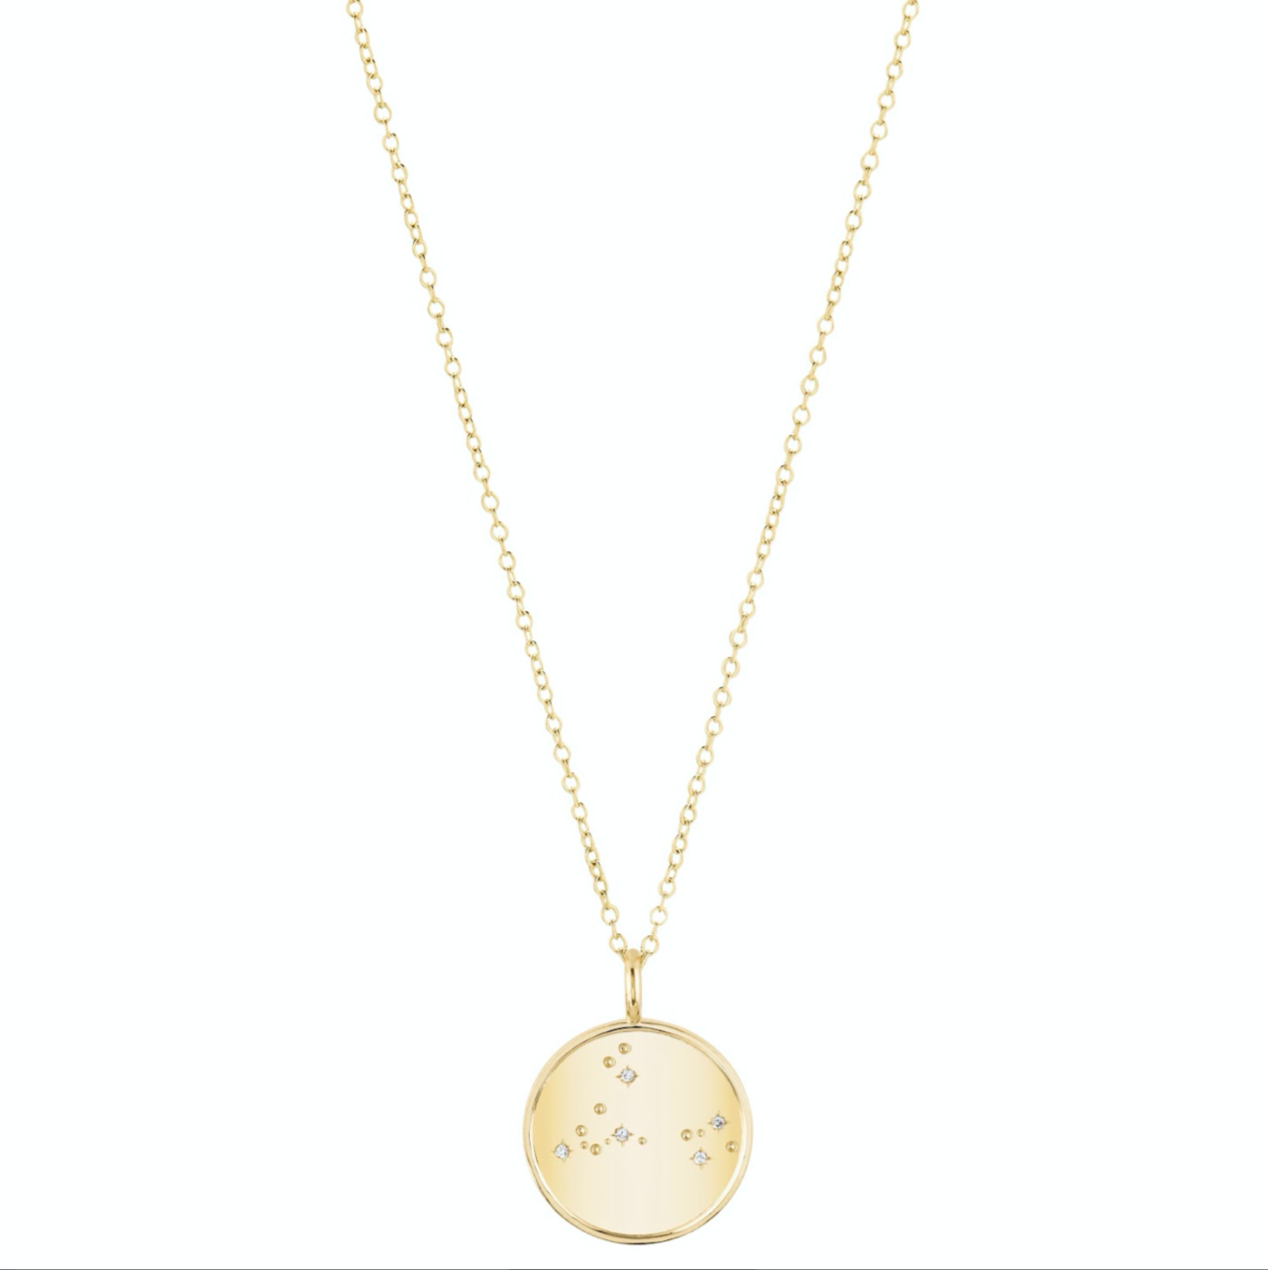 Double Sided Leo Constellation Necklace